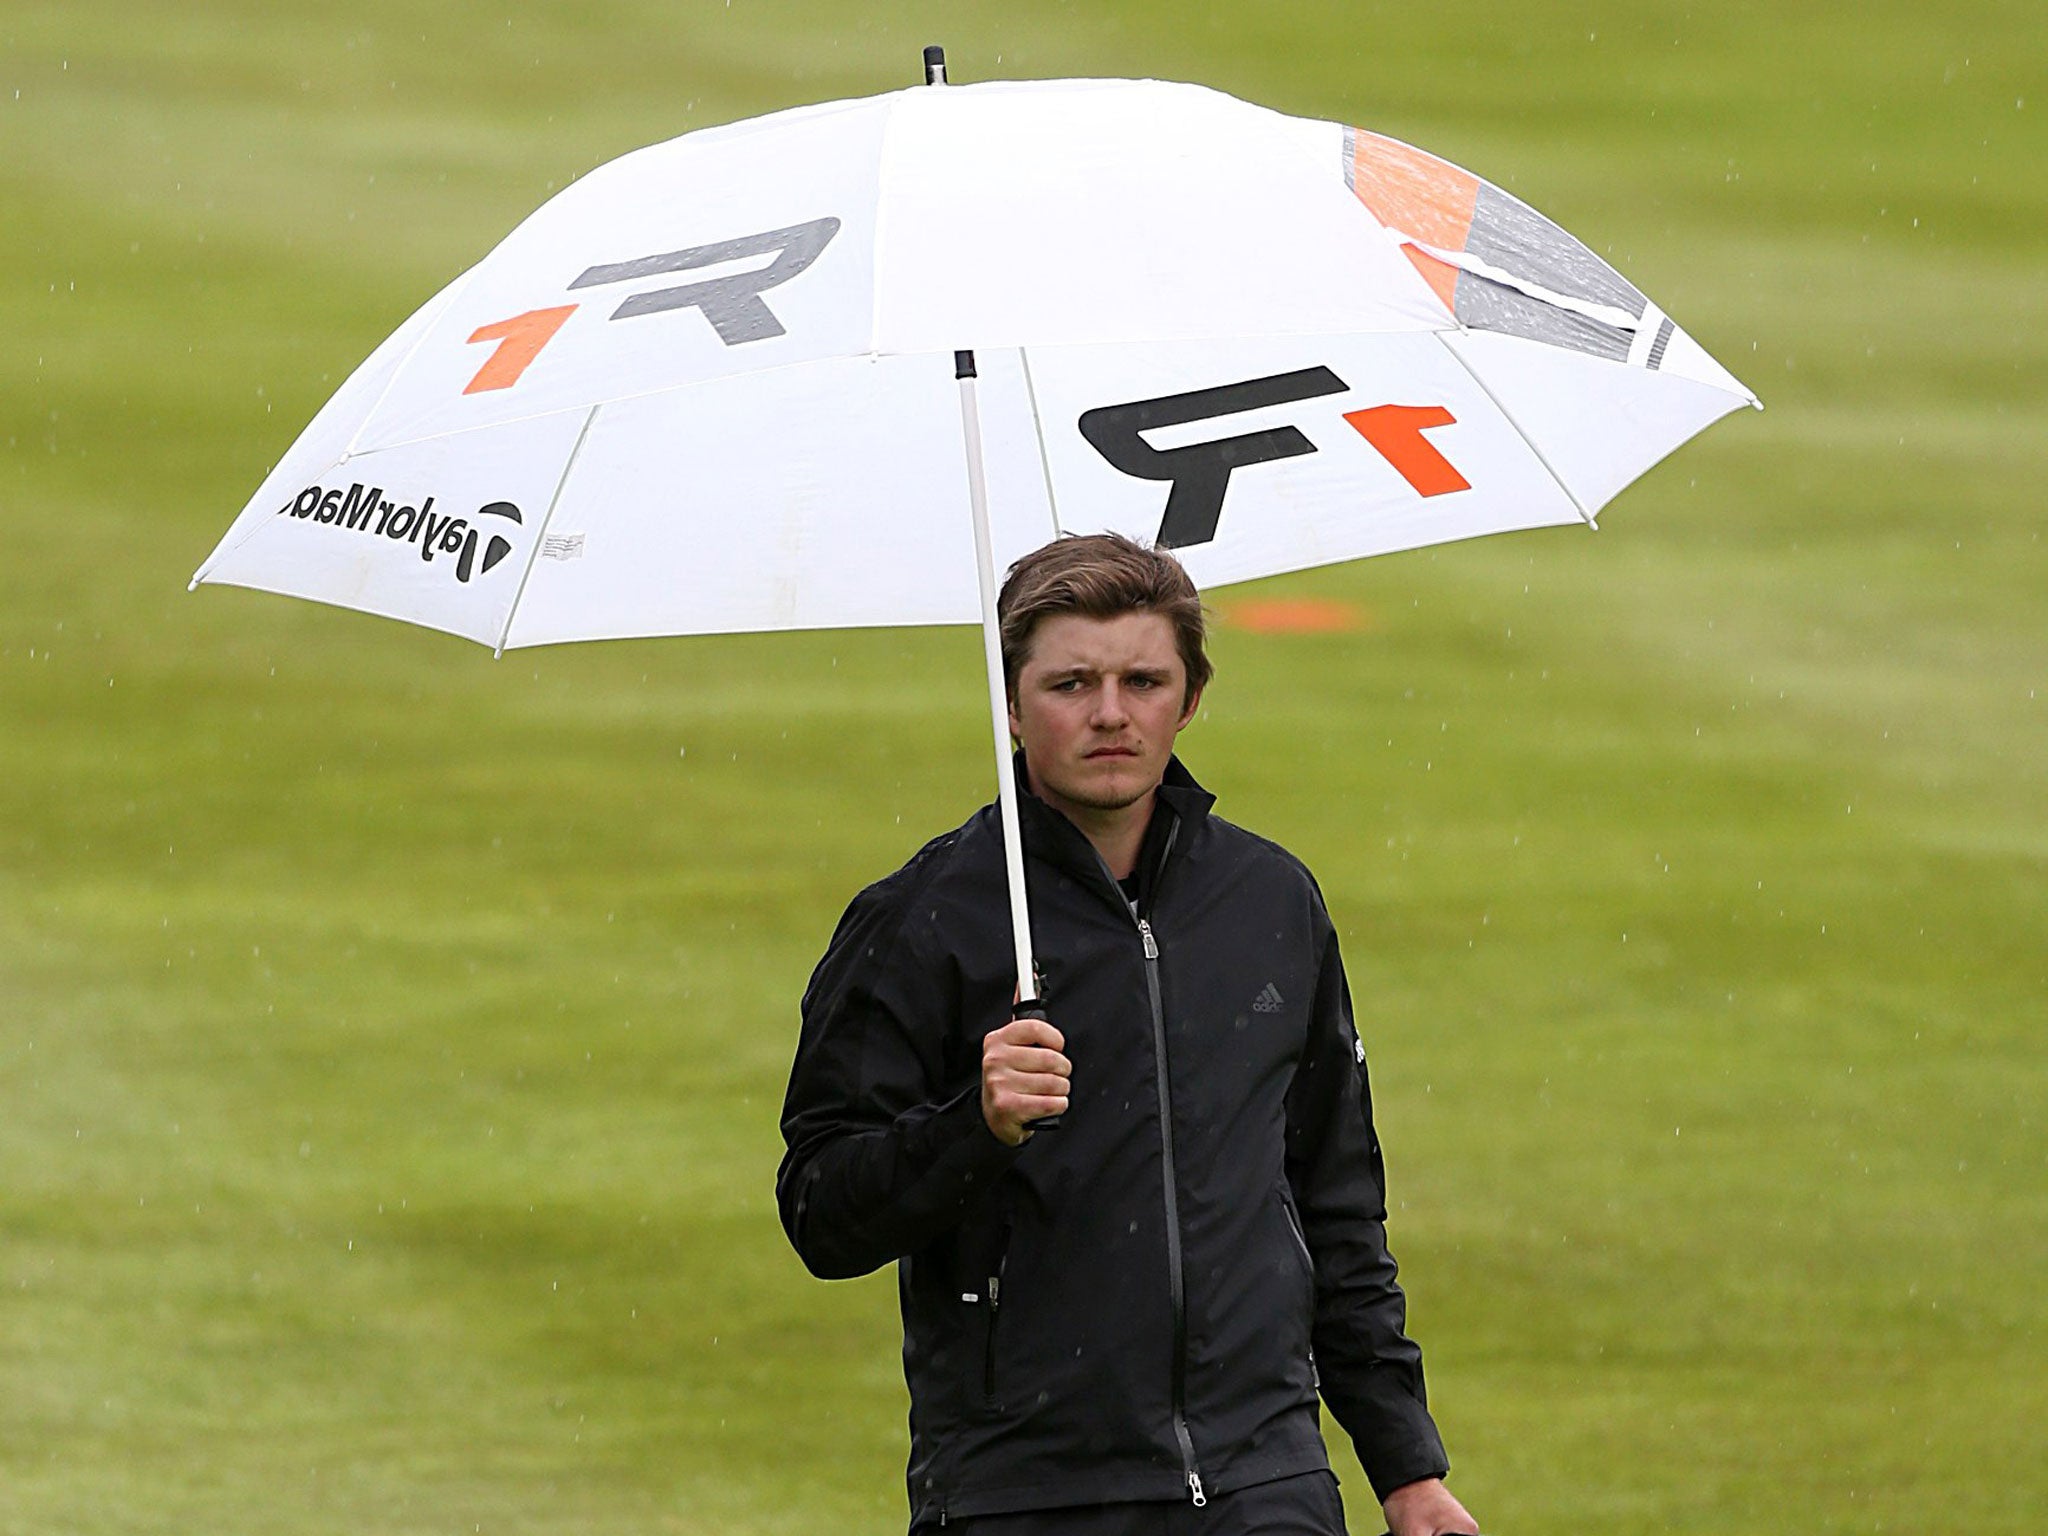 Eddie Pepperell carded a 69